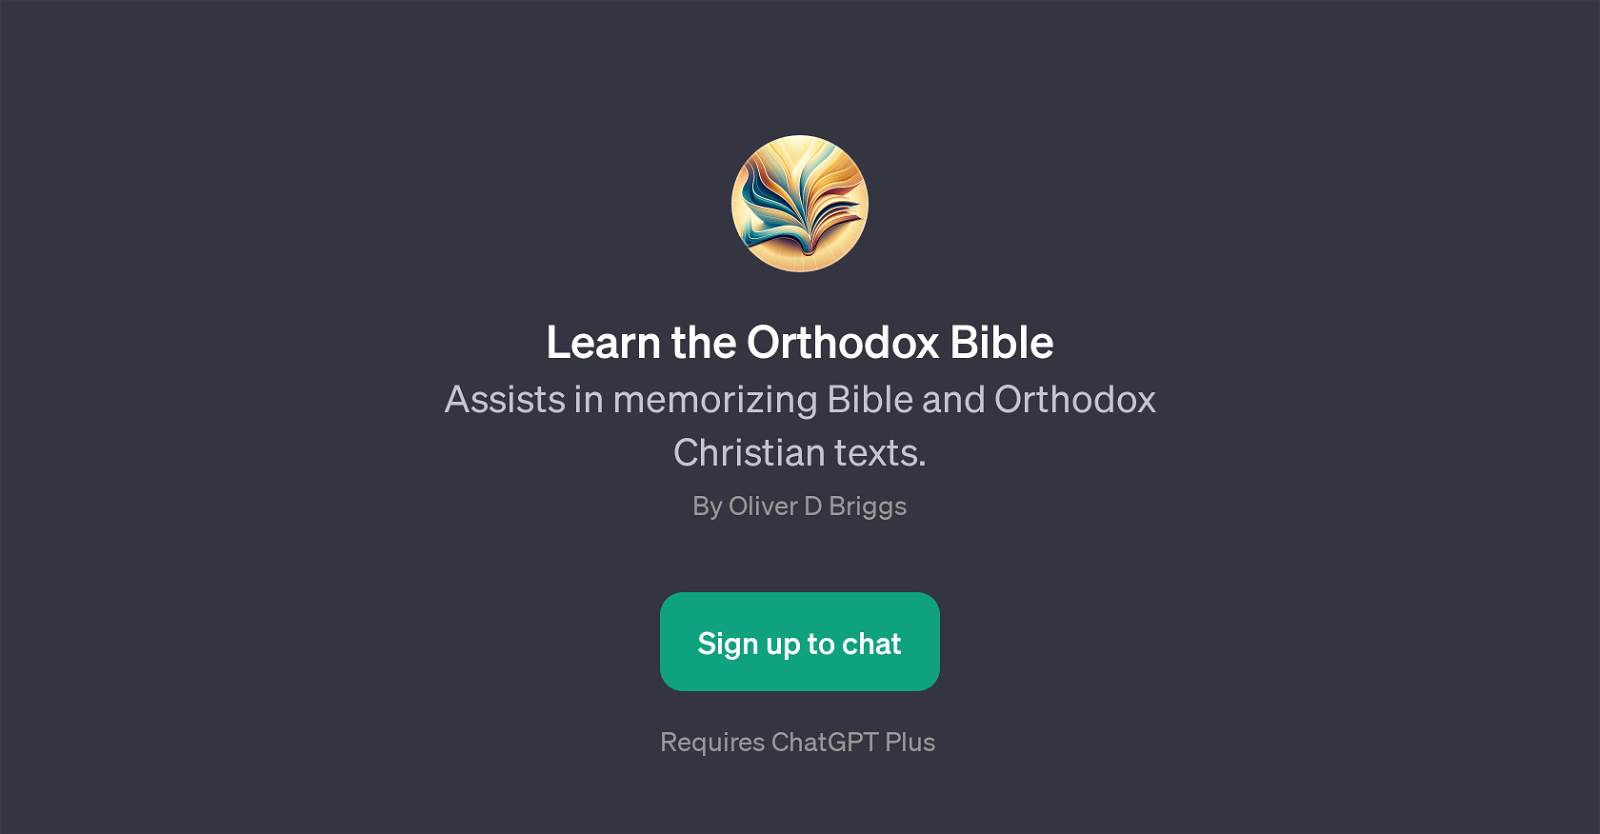 Learn the Orthodox Bible website